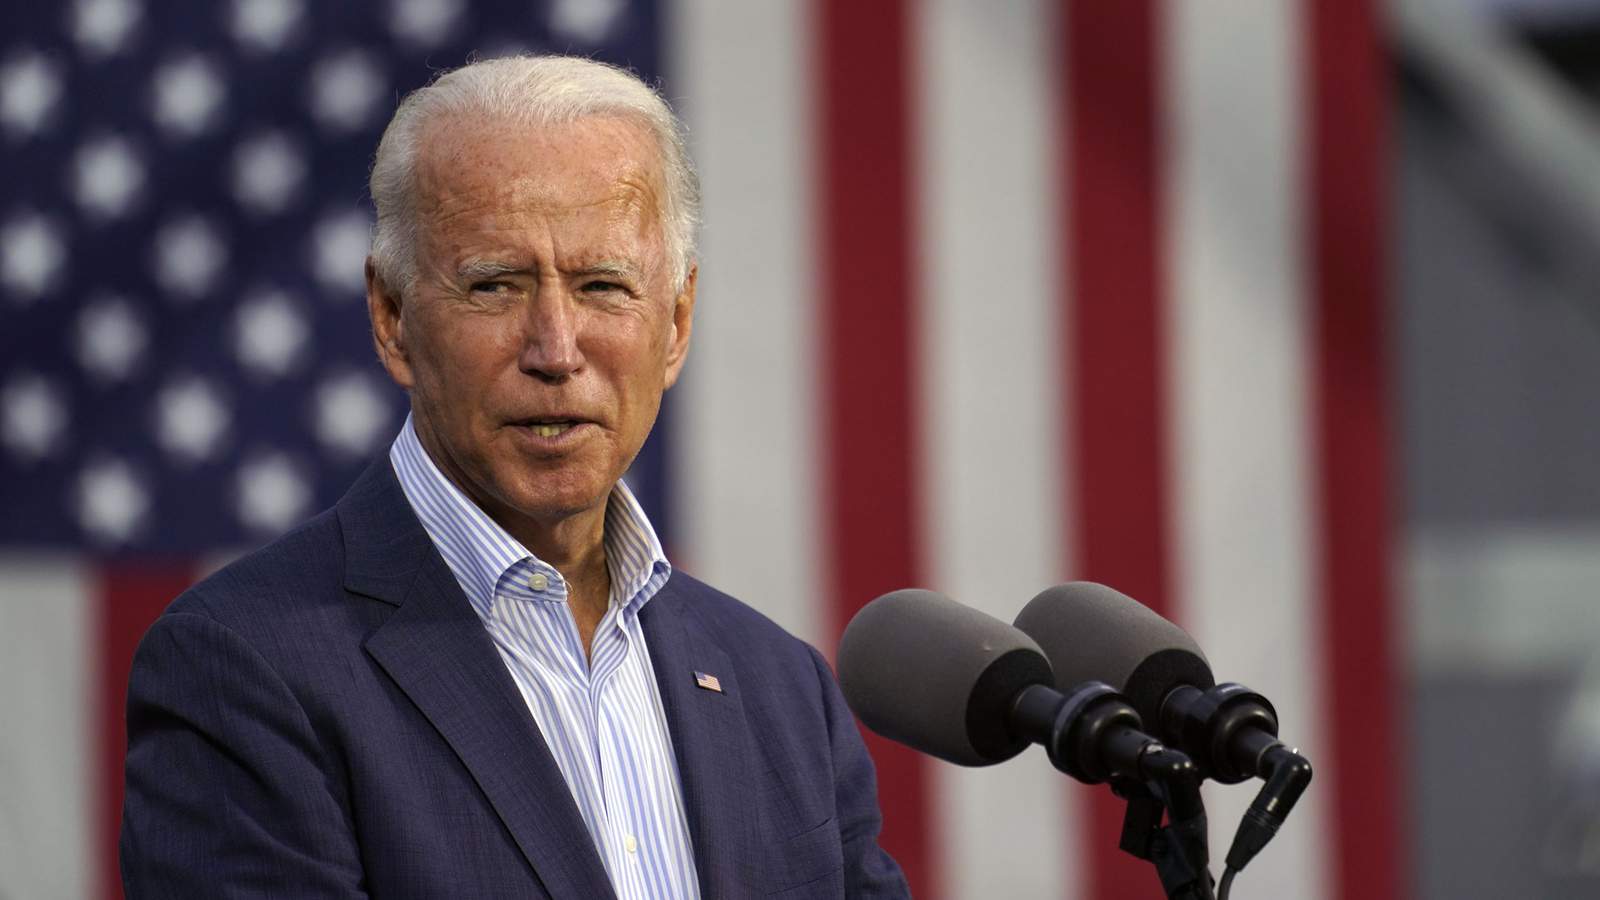 Biden to campaign in Detroit, Southfield today